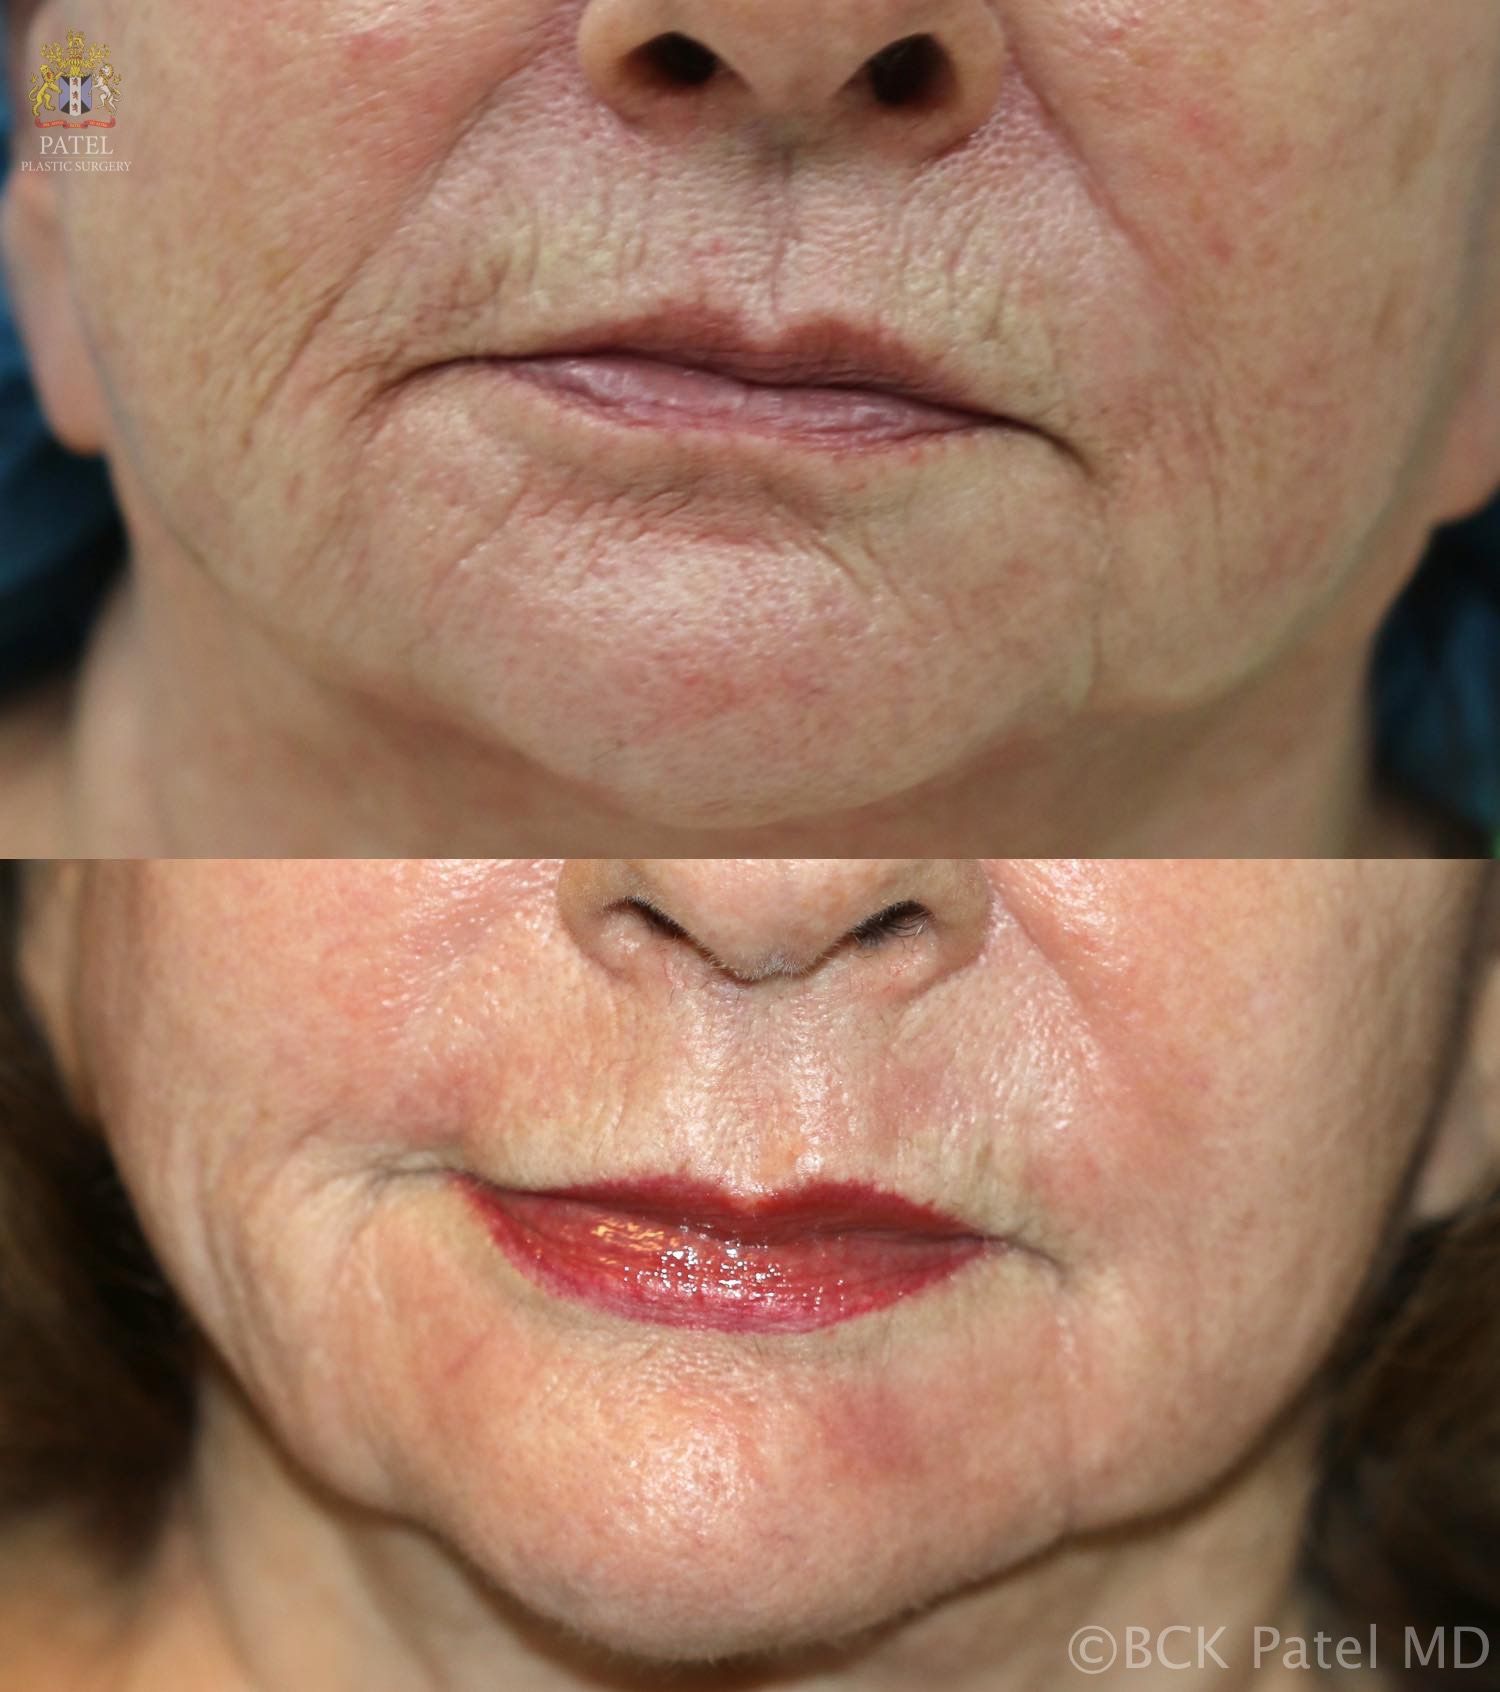 Nice results with improvement of lip andmouth smoker's lines with the use of the CO2 laser by Dr. BCK Patel MD, FRCS, Salt Lake City, London, St George